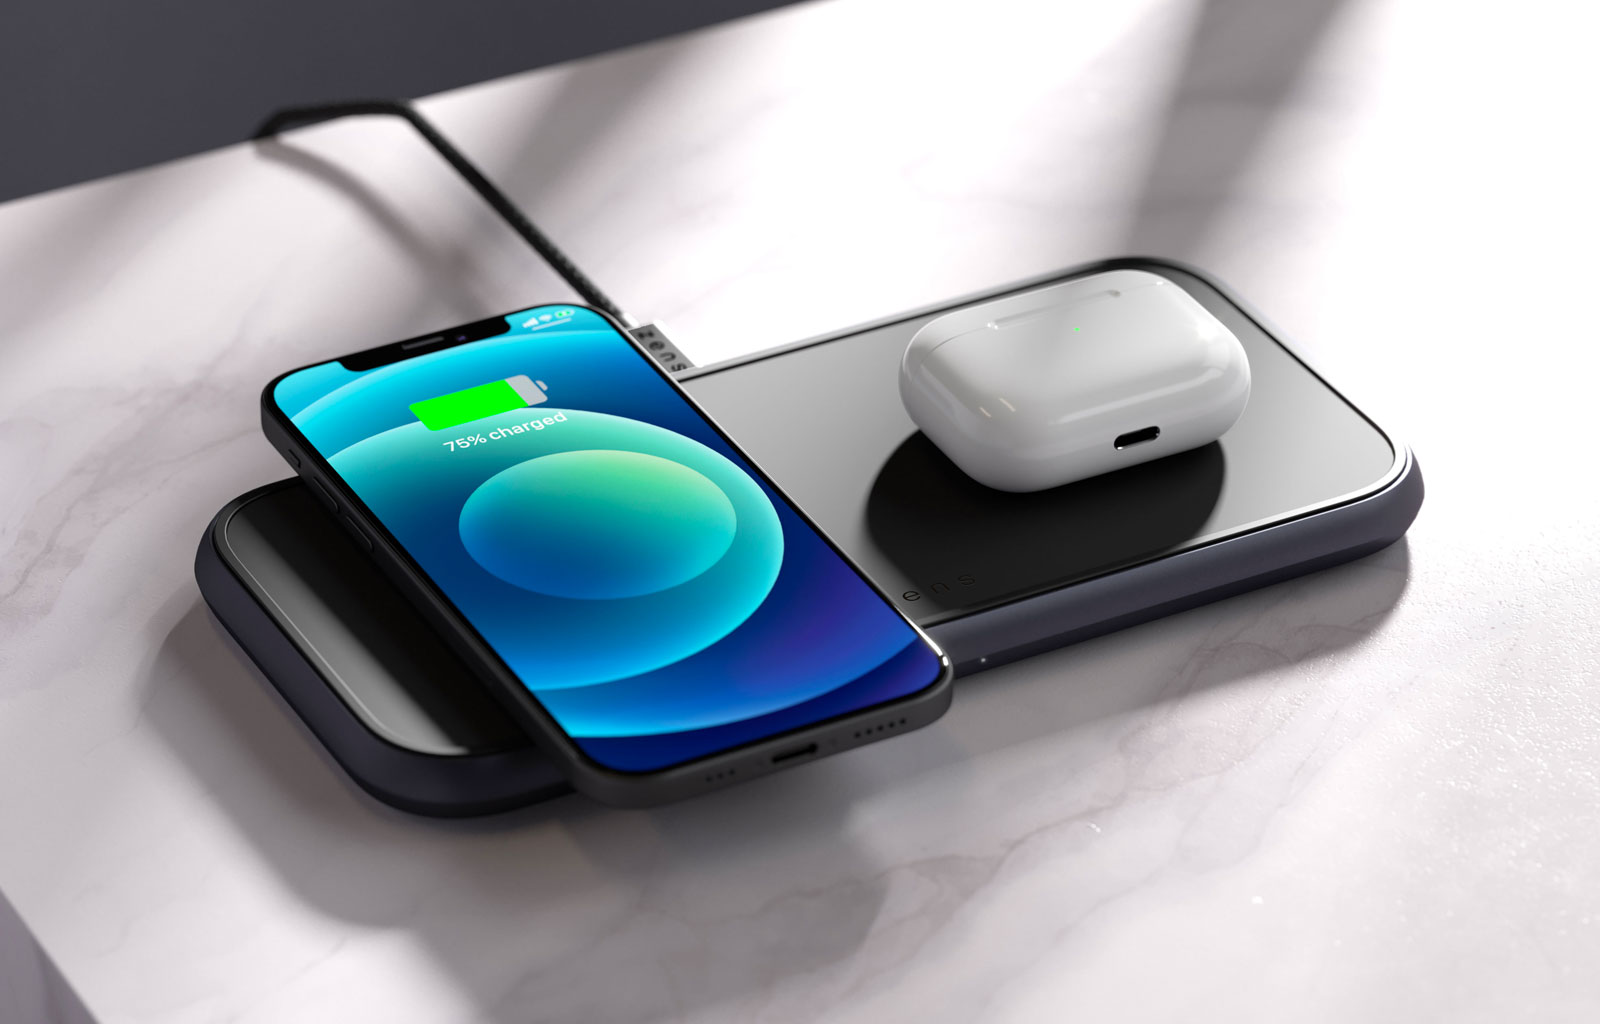 iPhone wireless chargers